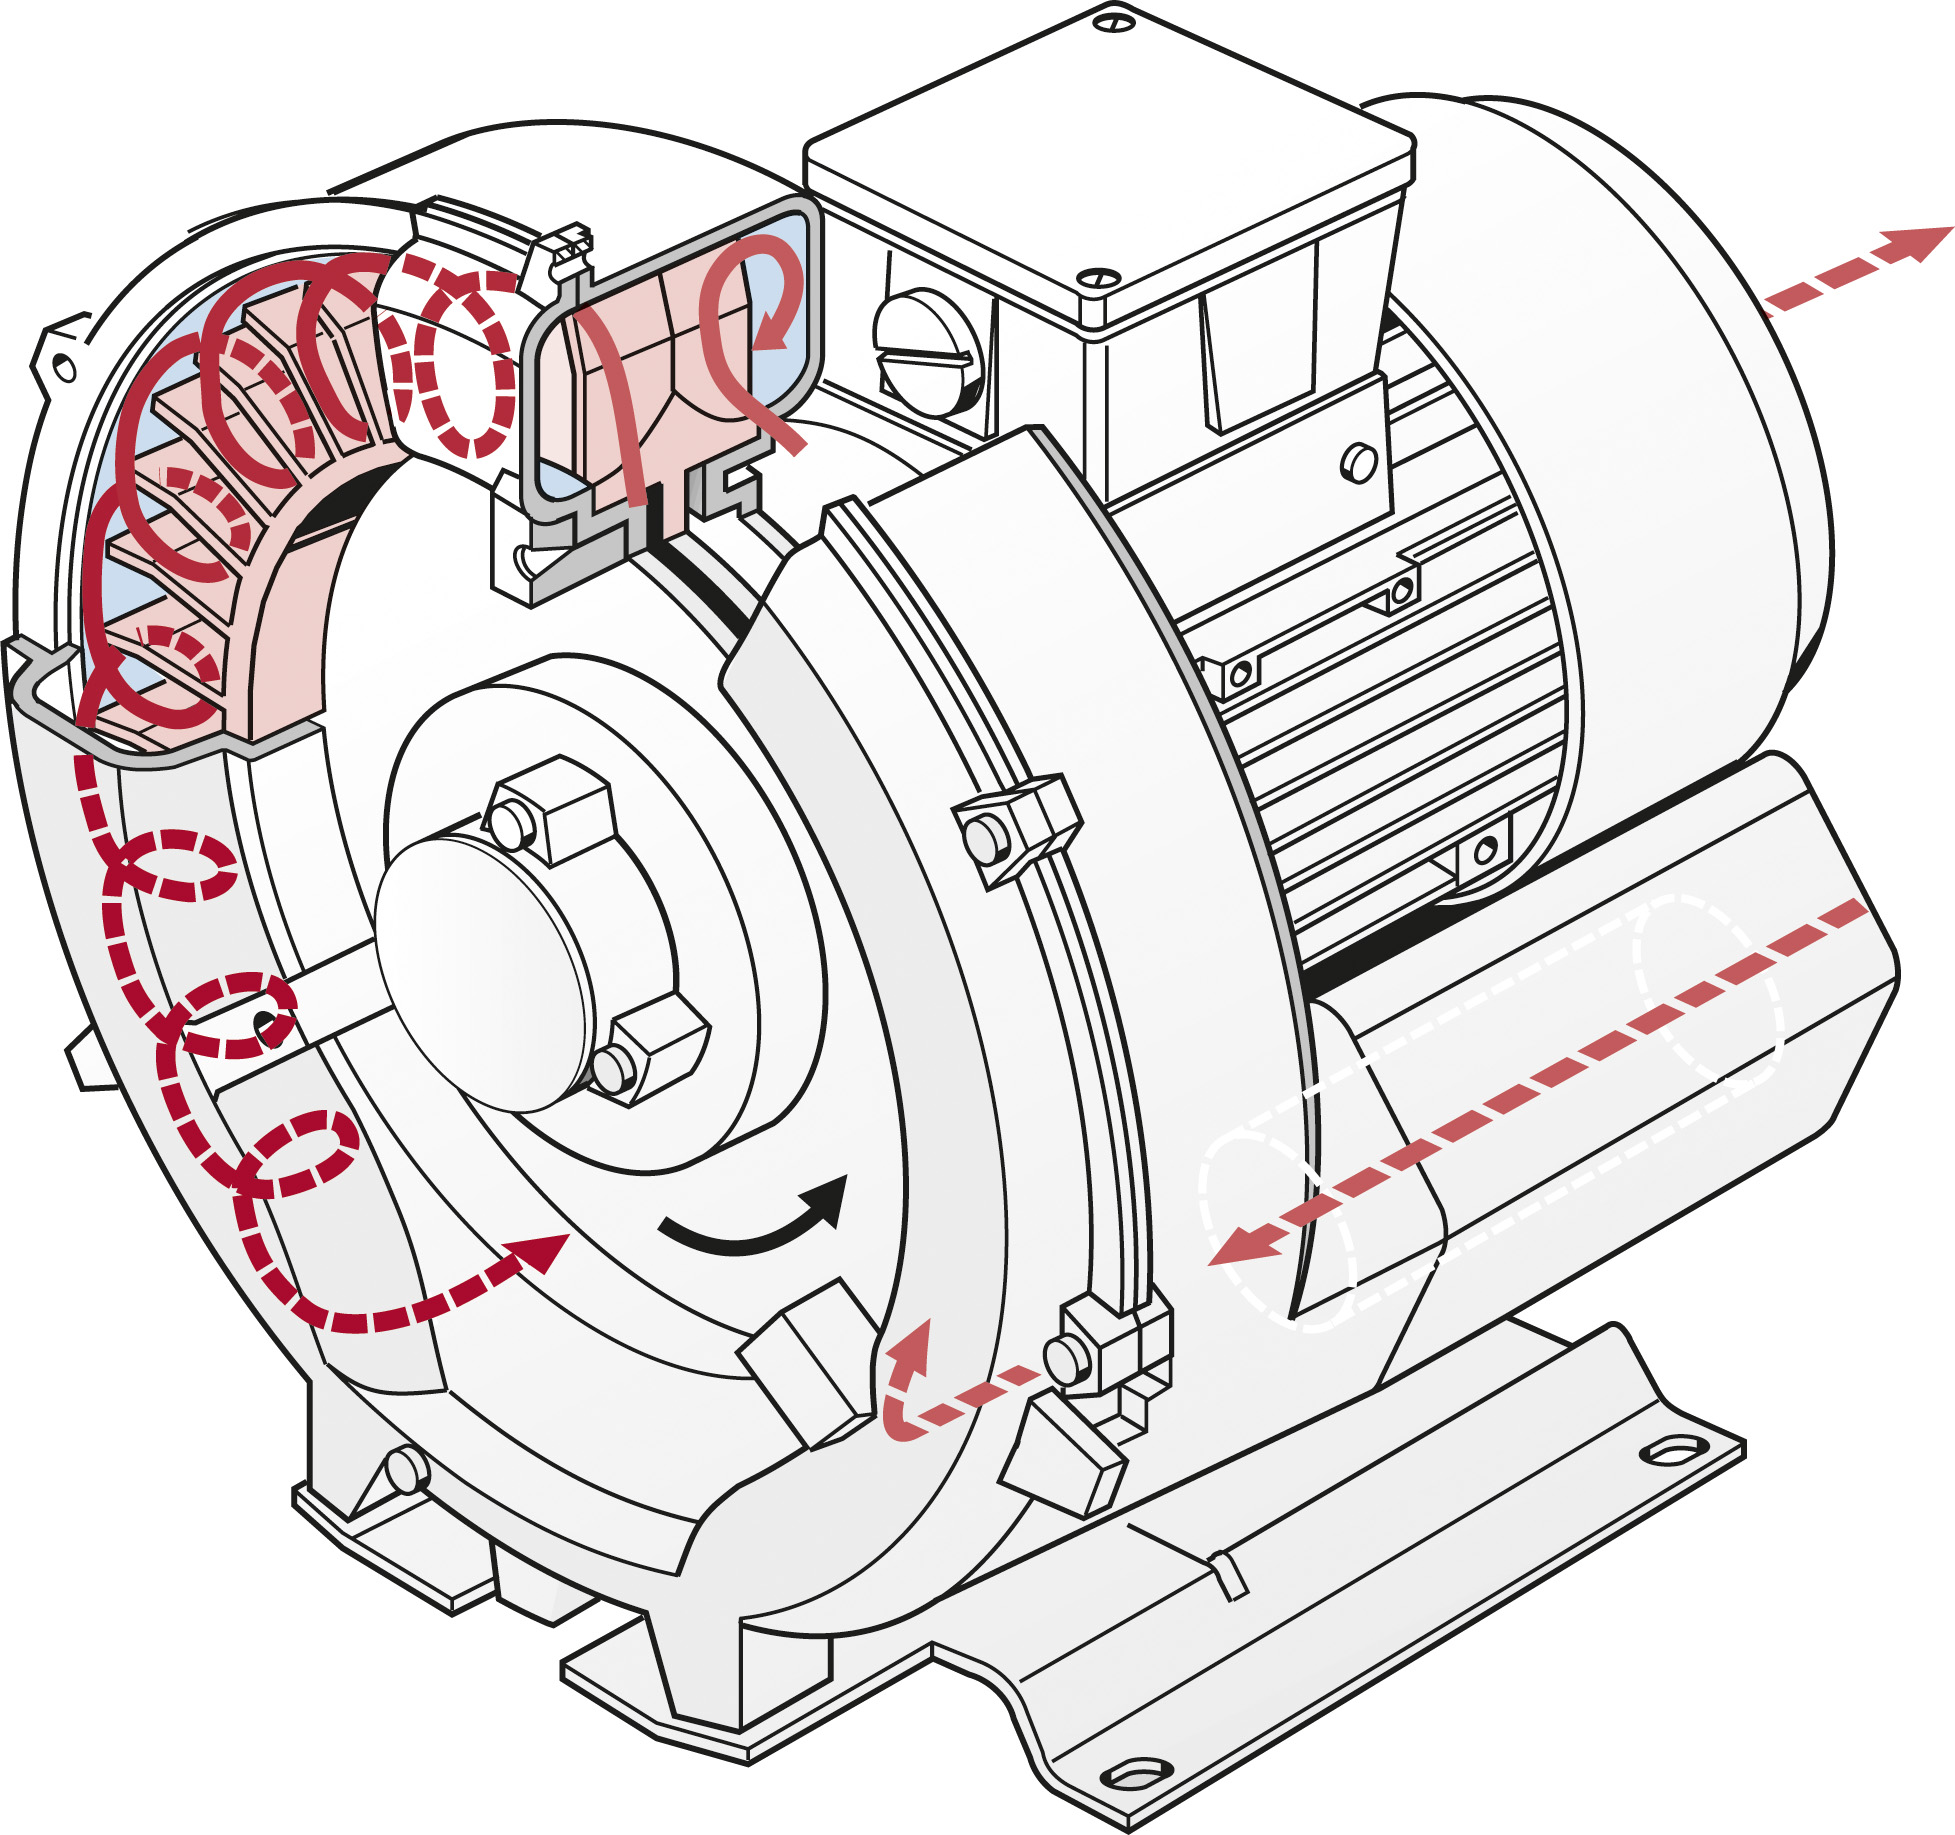 G Series Side Channel Blower Operating Principles